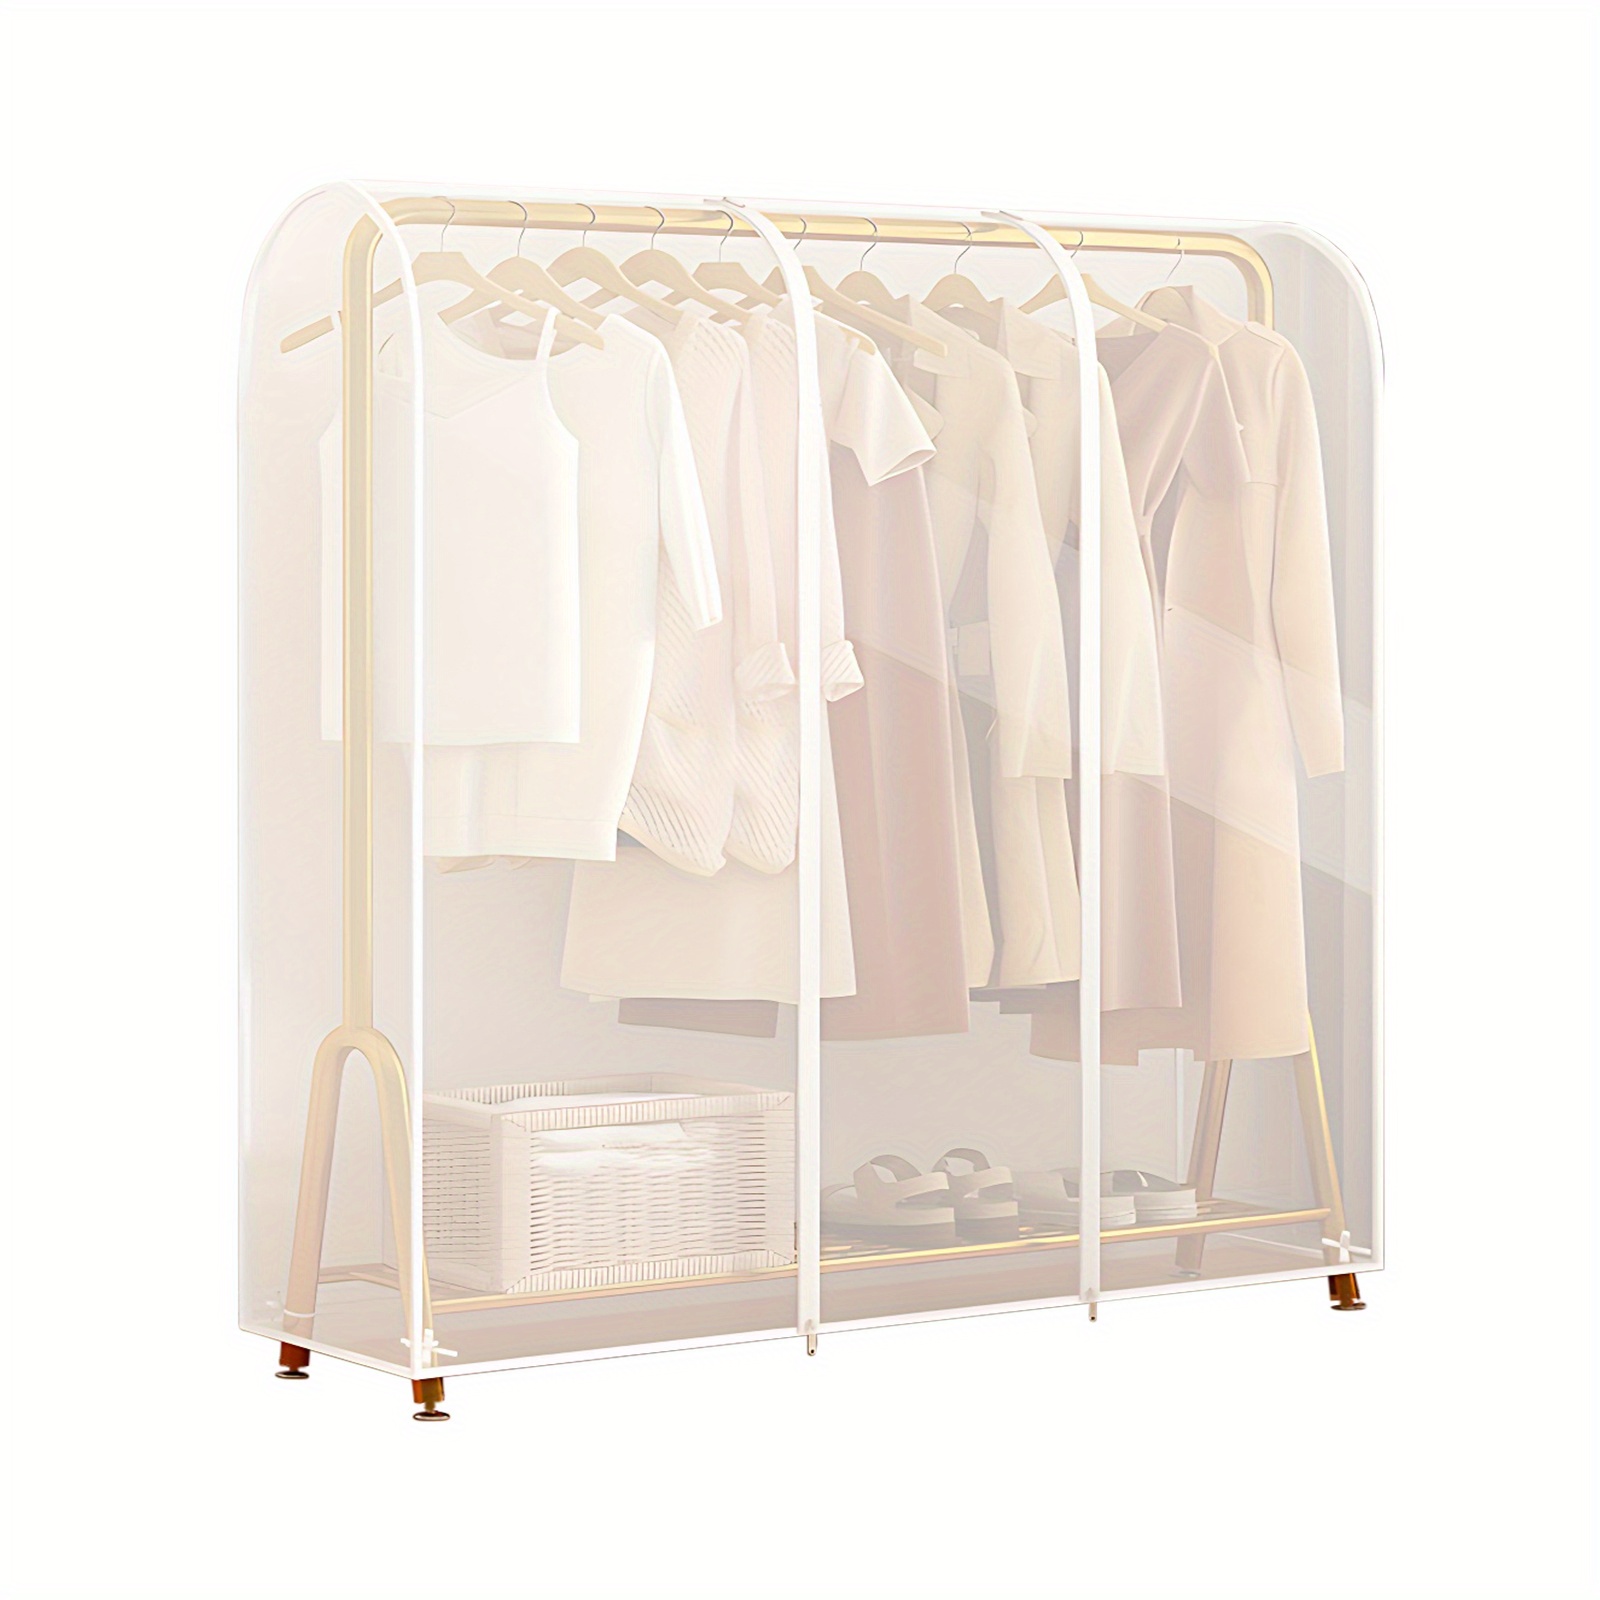 

1pc Thickened Garment Rack Cover, Translucent Moisture & Dust-proof Clothes Protector With Zippers, For Suits Coats T-shirts, Ideal Home Supplies